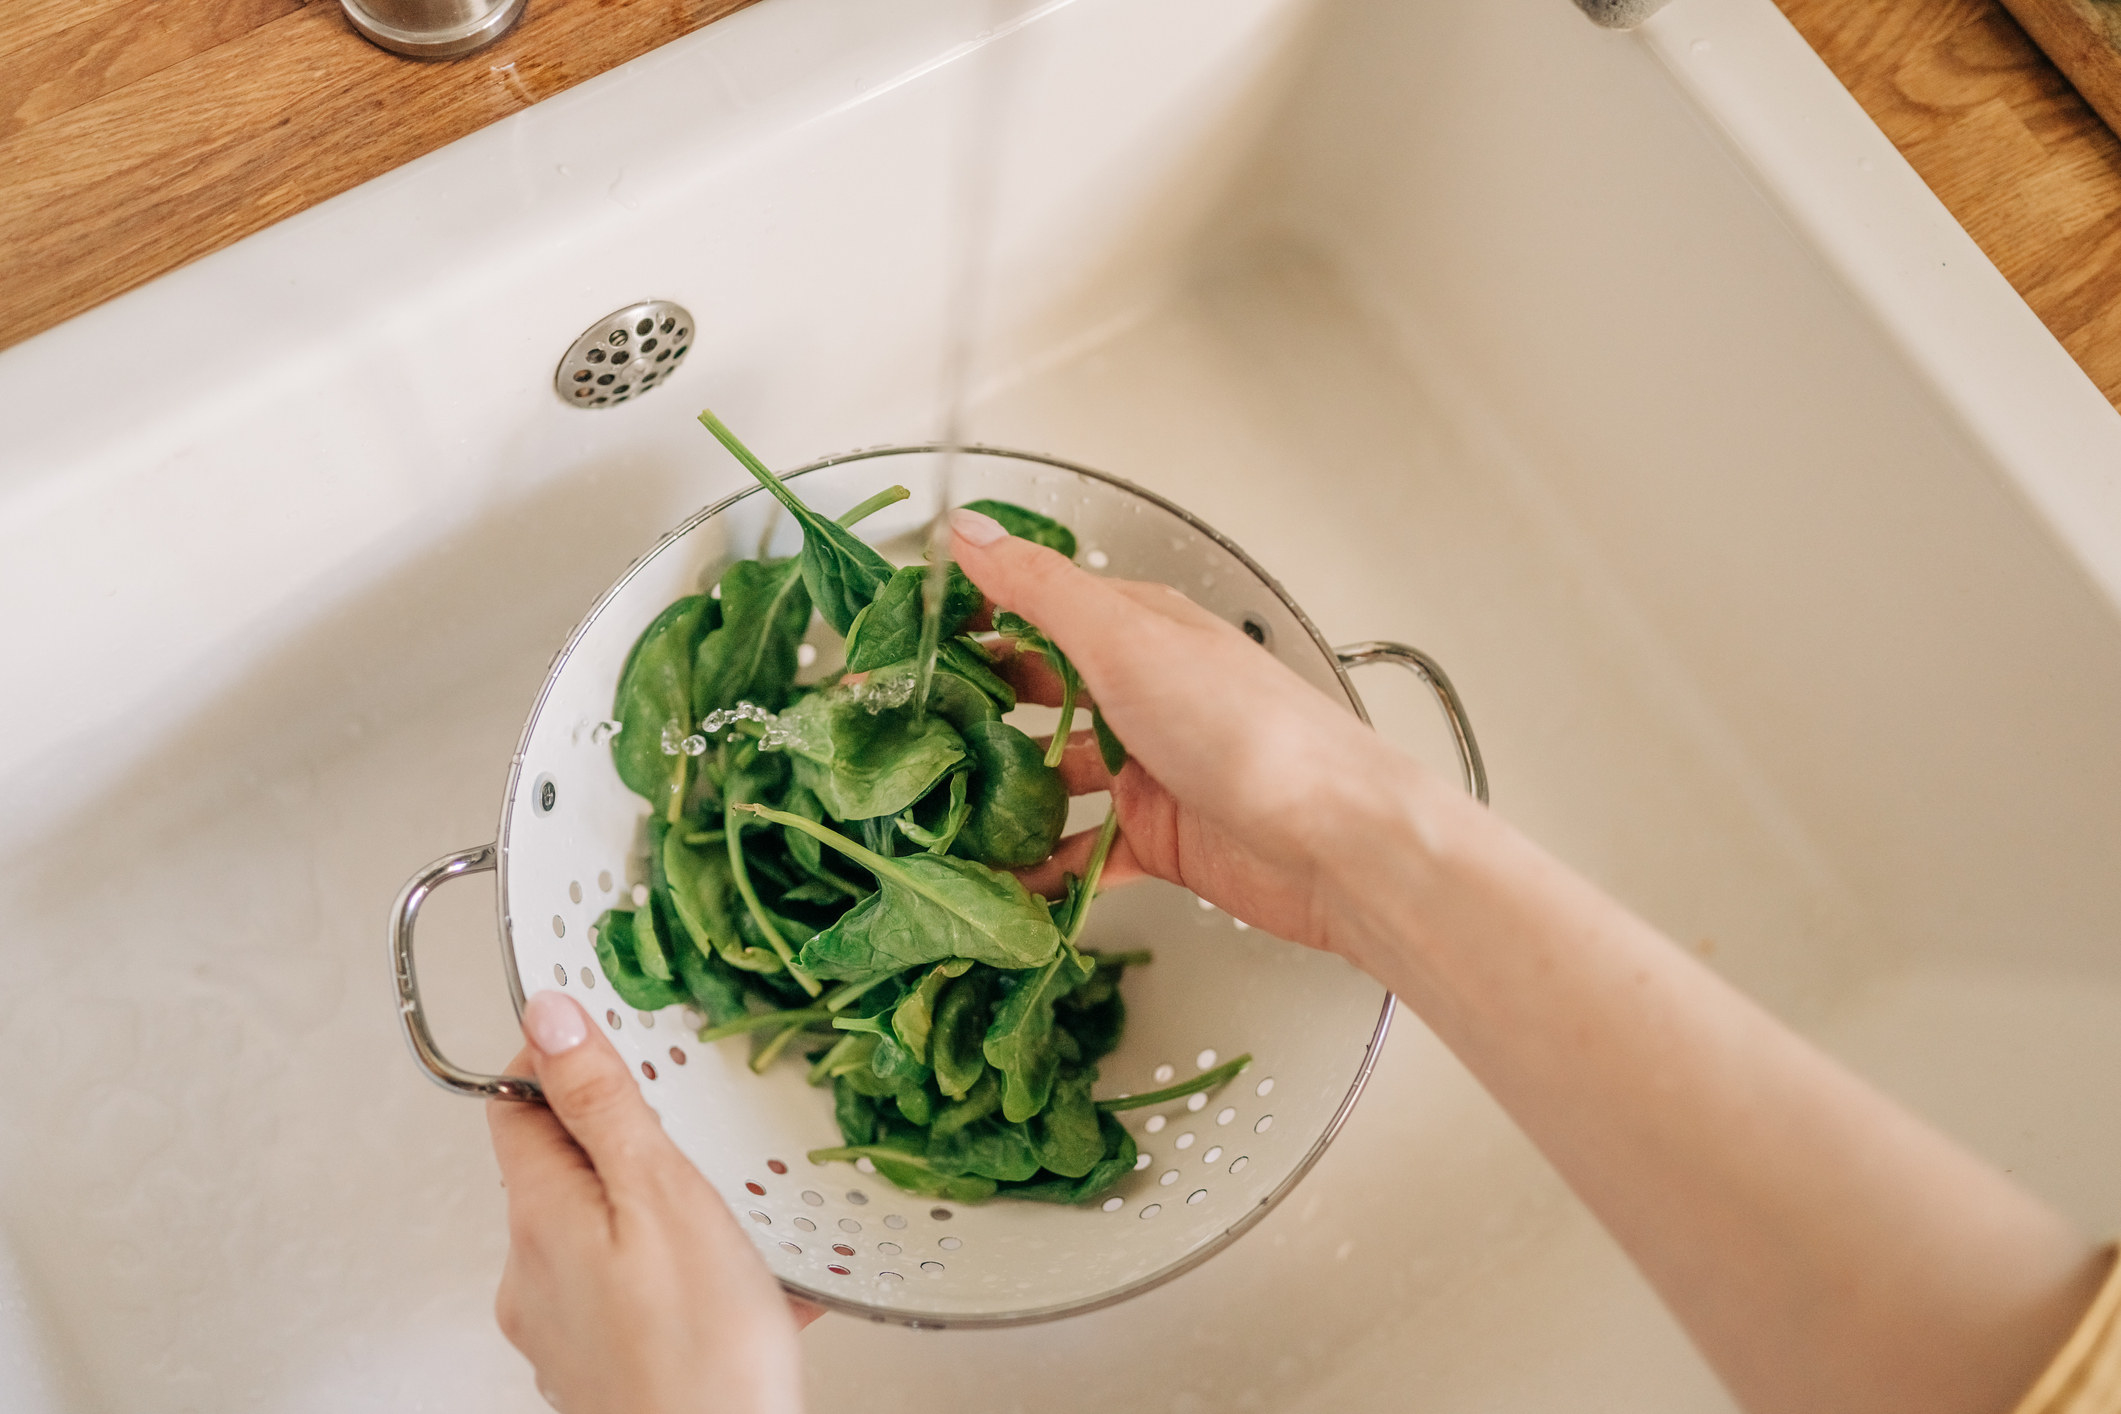 Female hands washing spinach vegetables at the kitchen sink